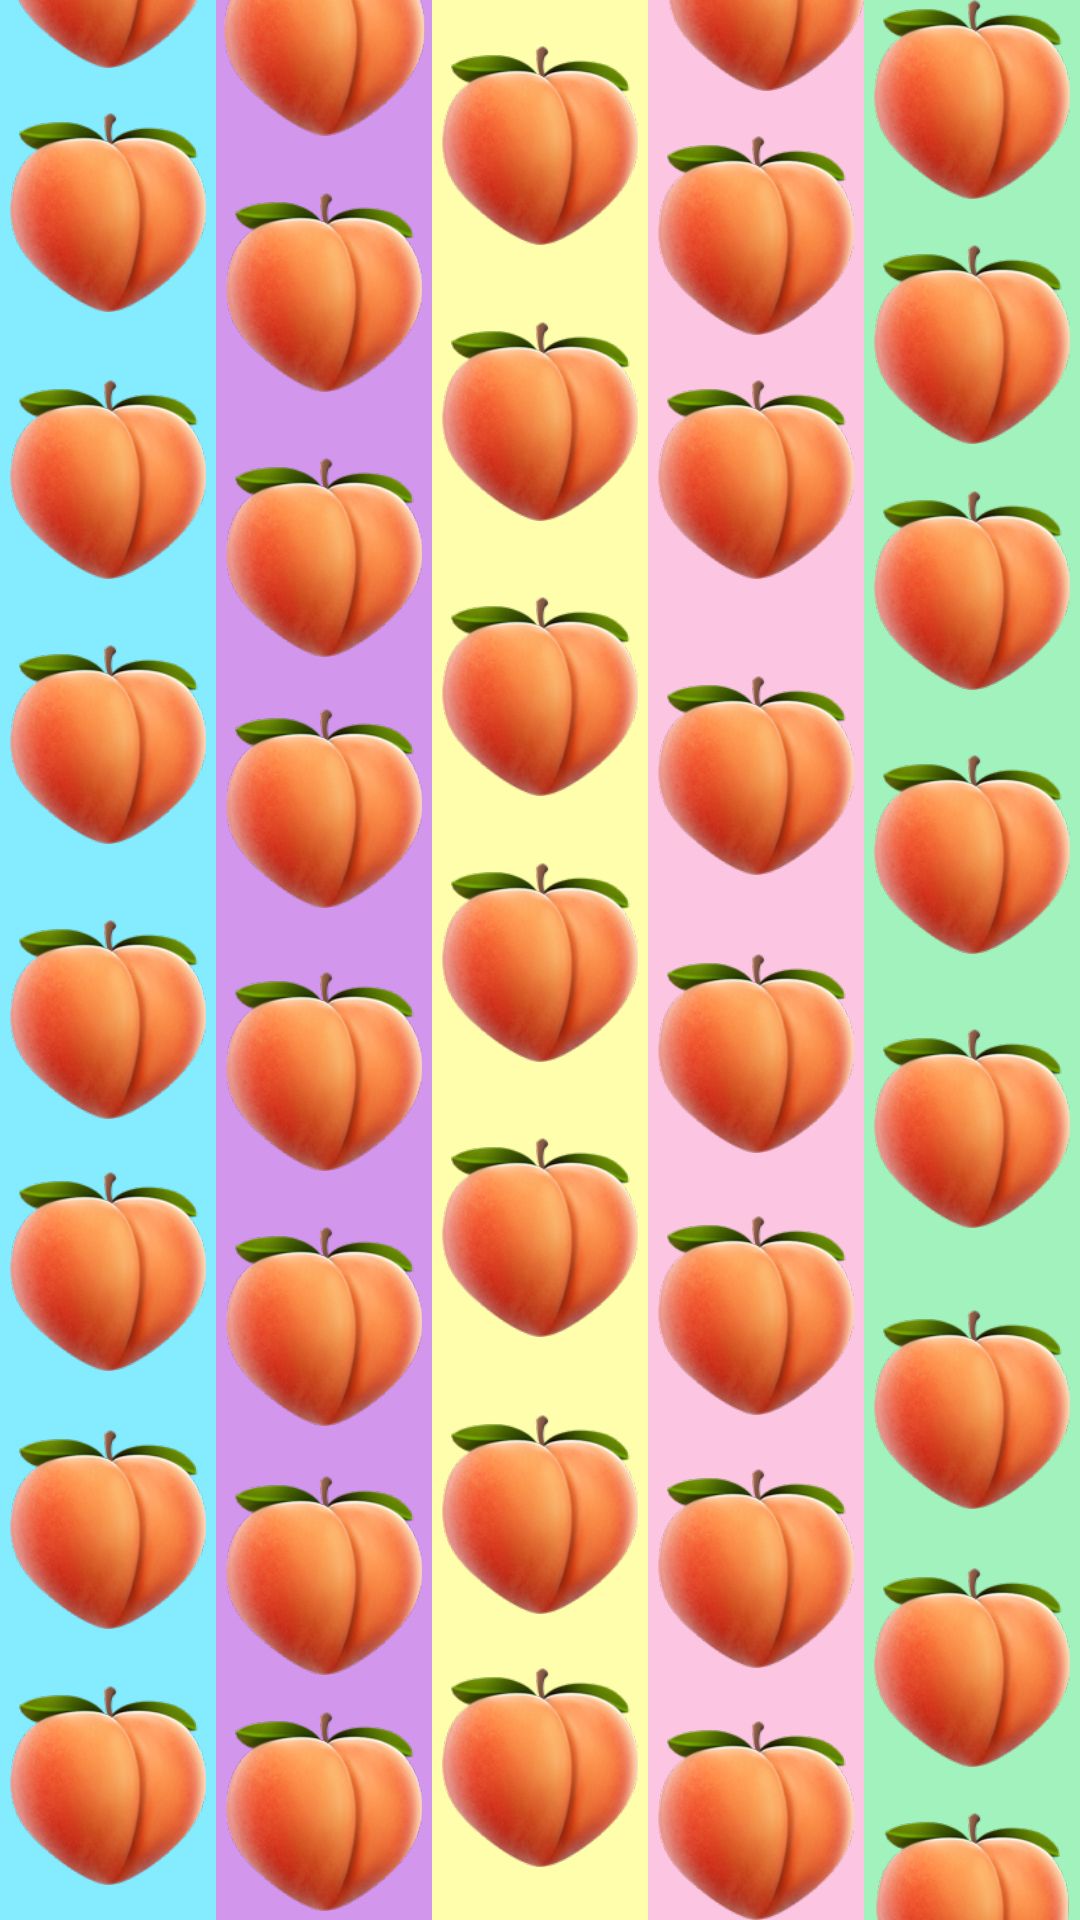 Peaches Wallpaper Vector Images (over 4,800)